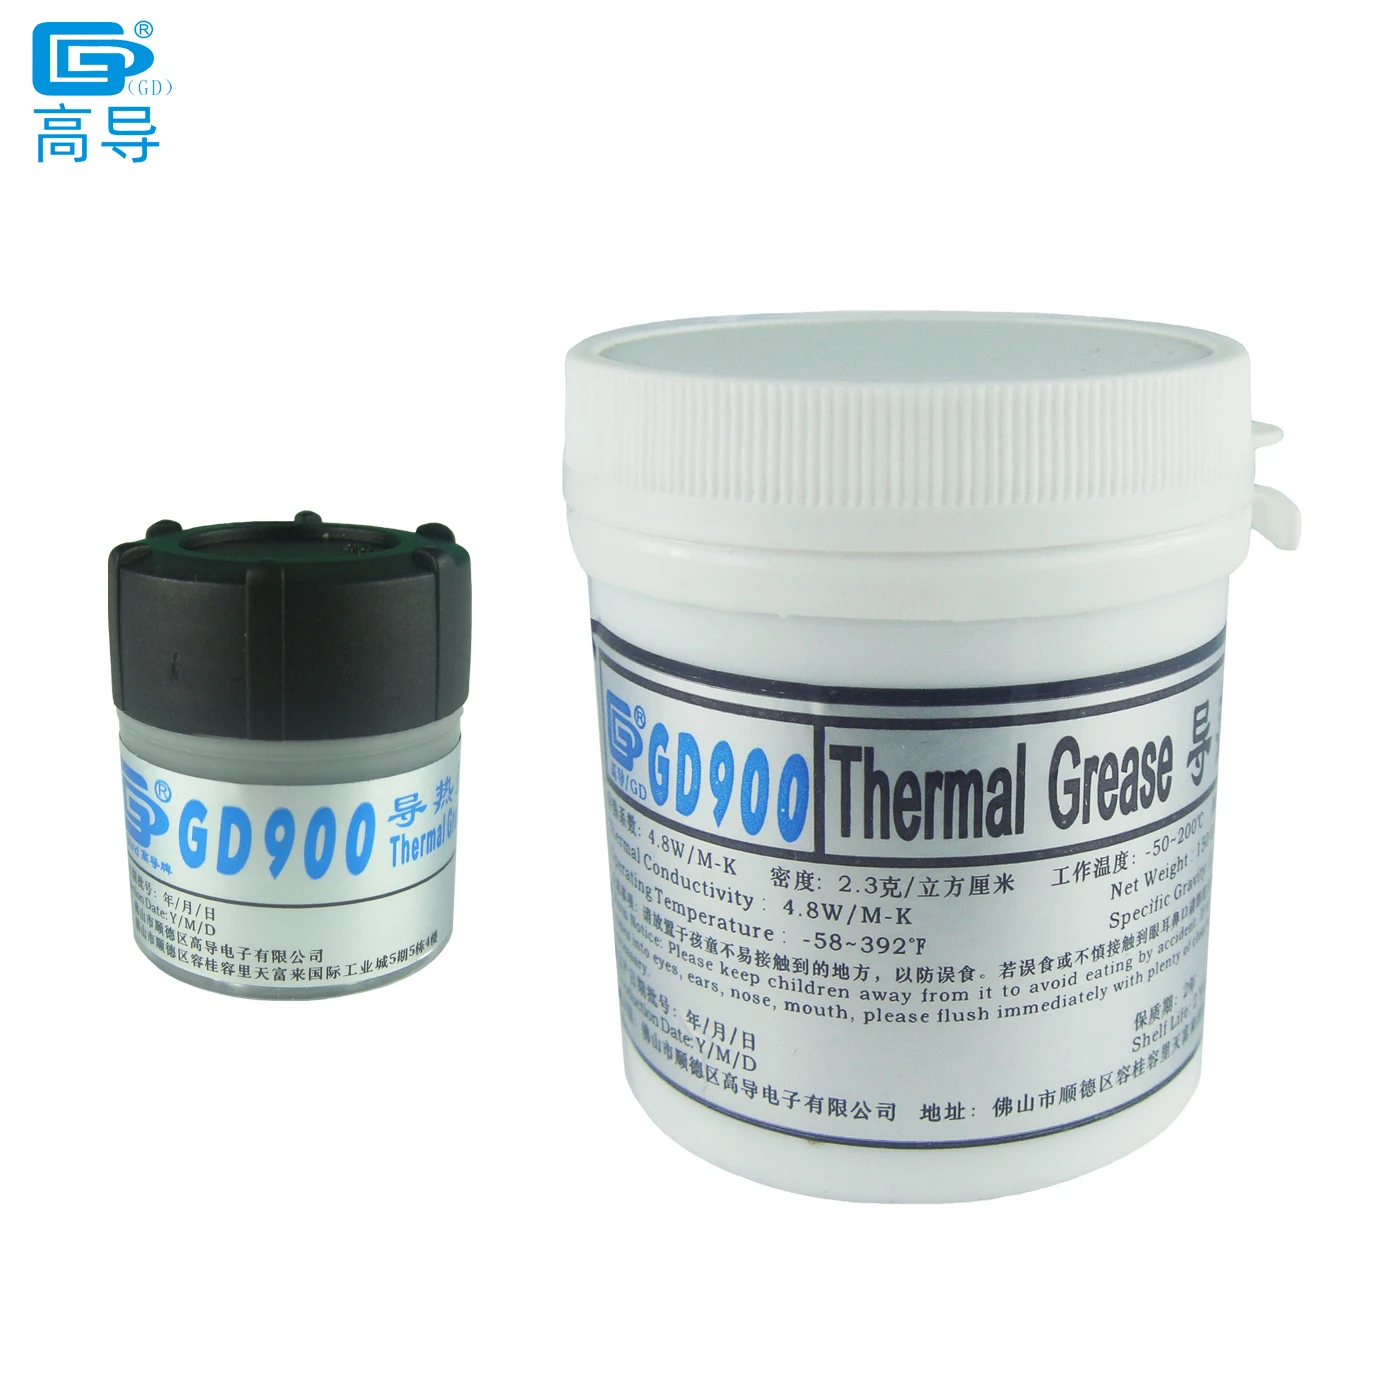 

GD900 Thermal Conductive Grease Paste Plaster Heat Sink Compound Net Weight 30/150 Grams Can Packaging Gray for CPU LED GPU CN